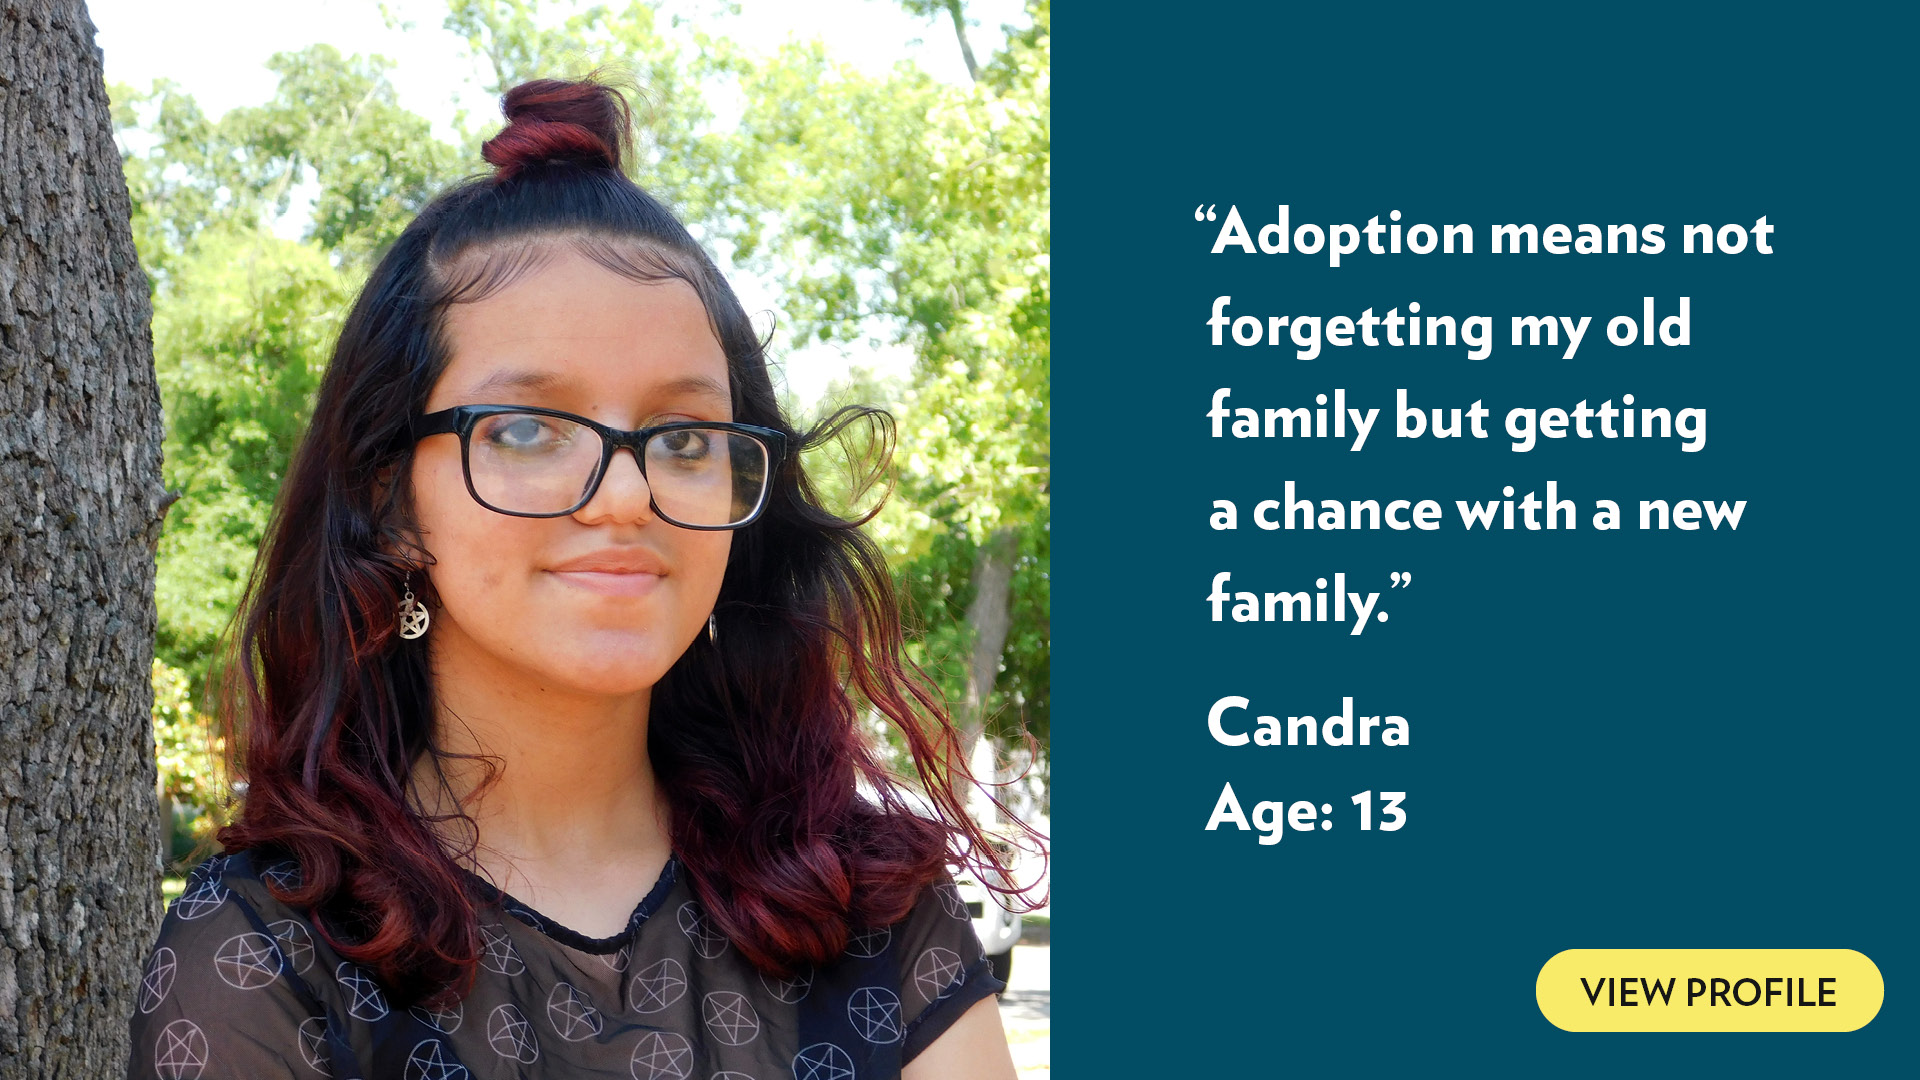 Adoption means not forgetting my old family but getting a chance with a new family. Candra, age 13. View profile.